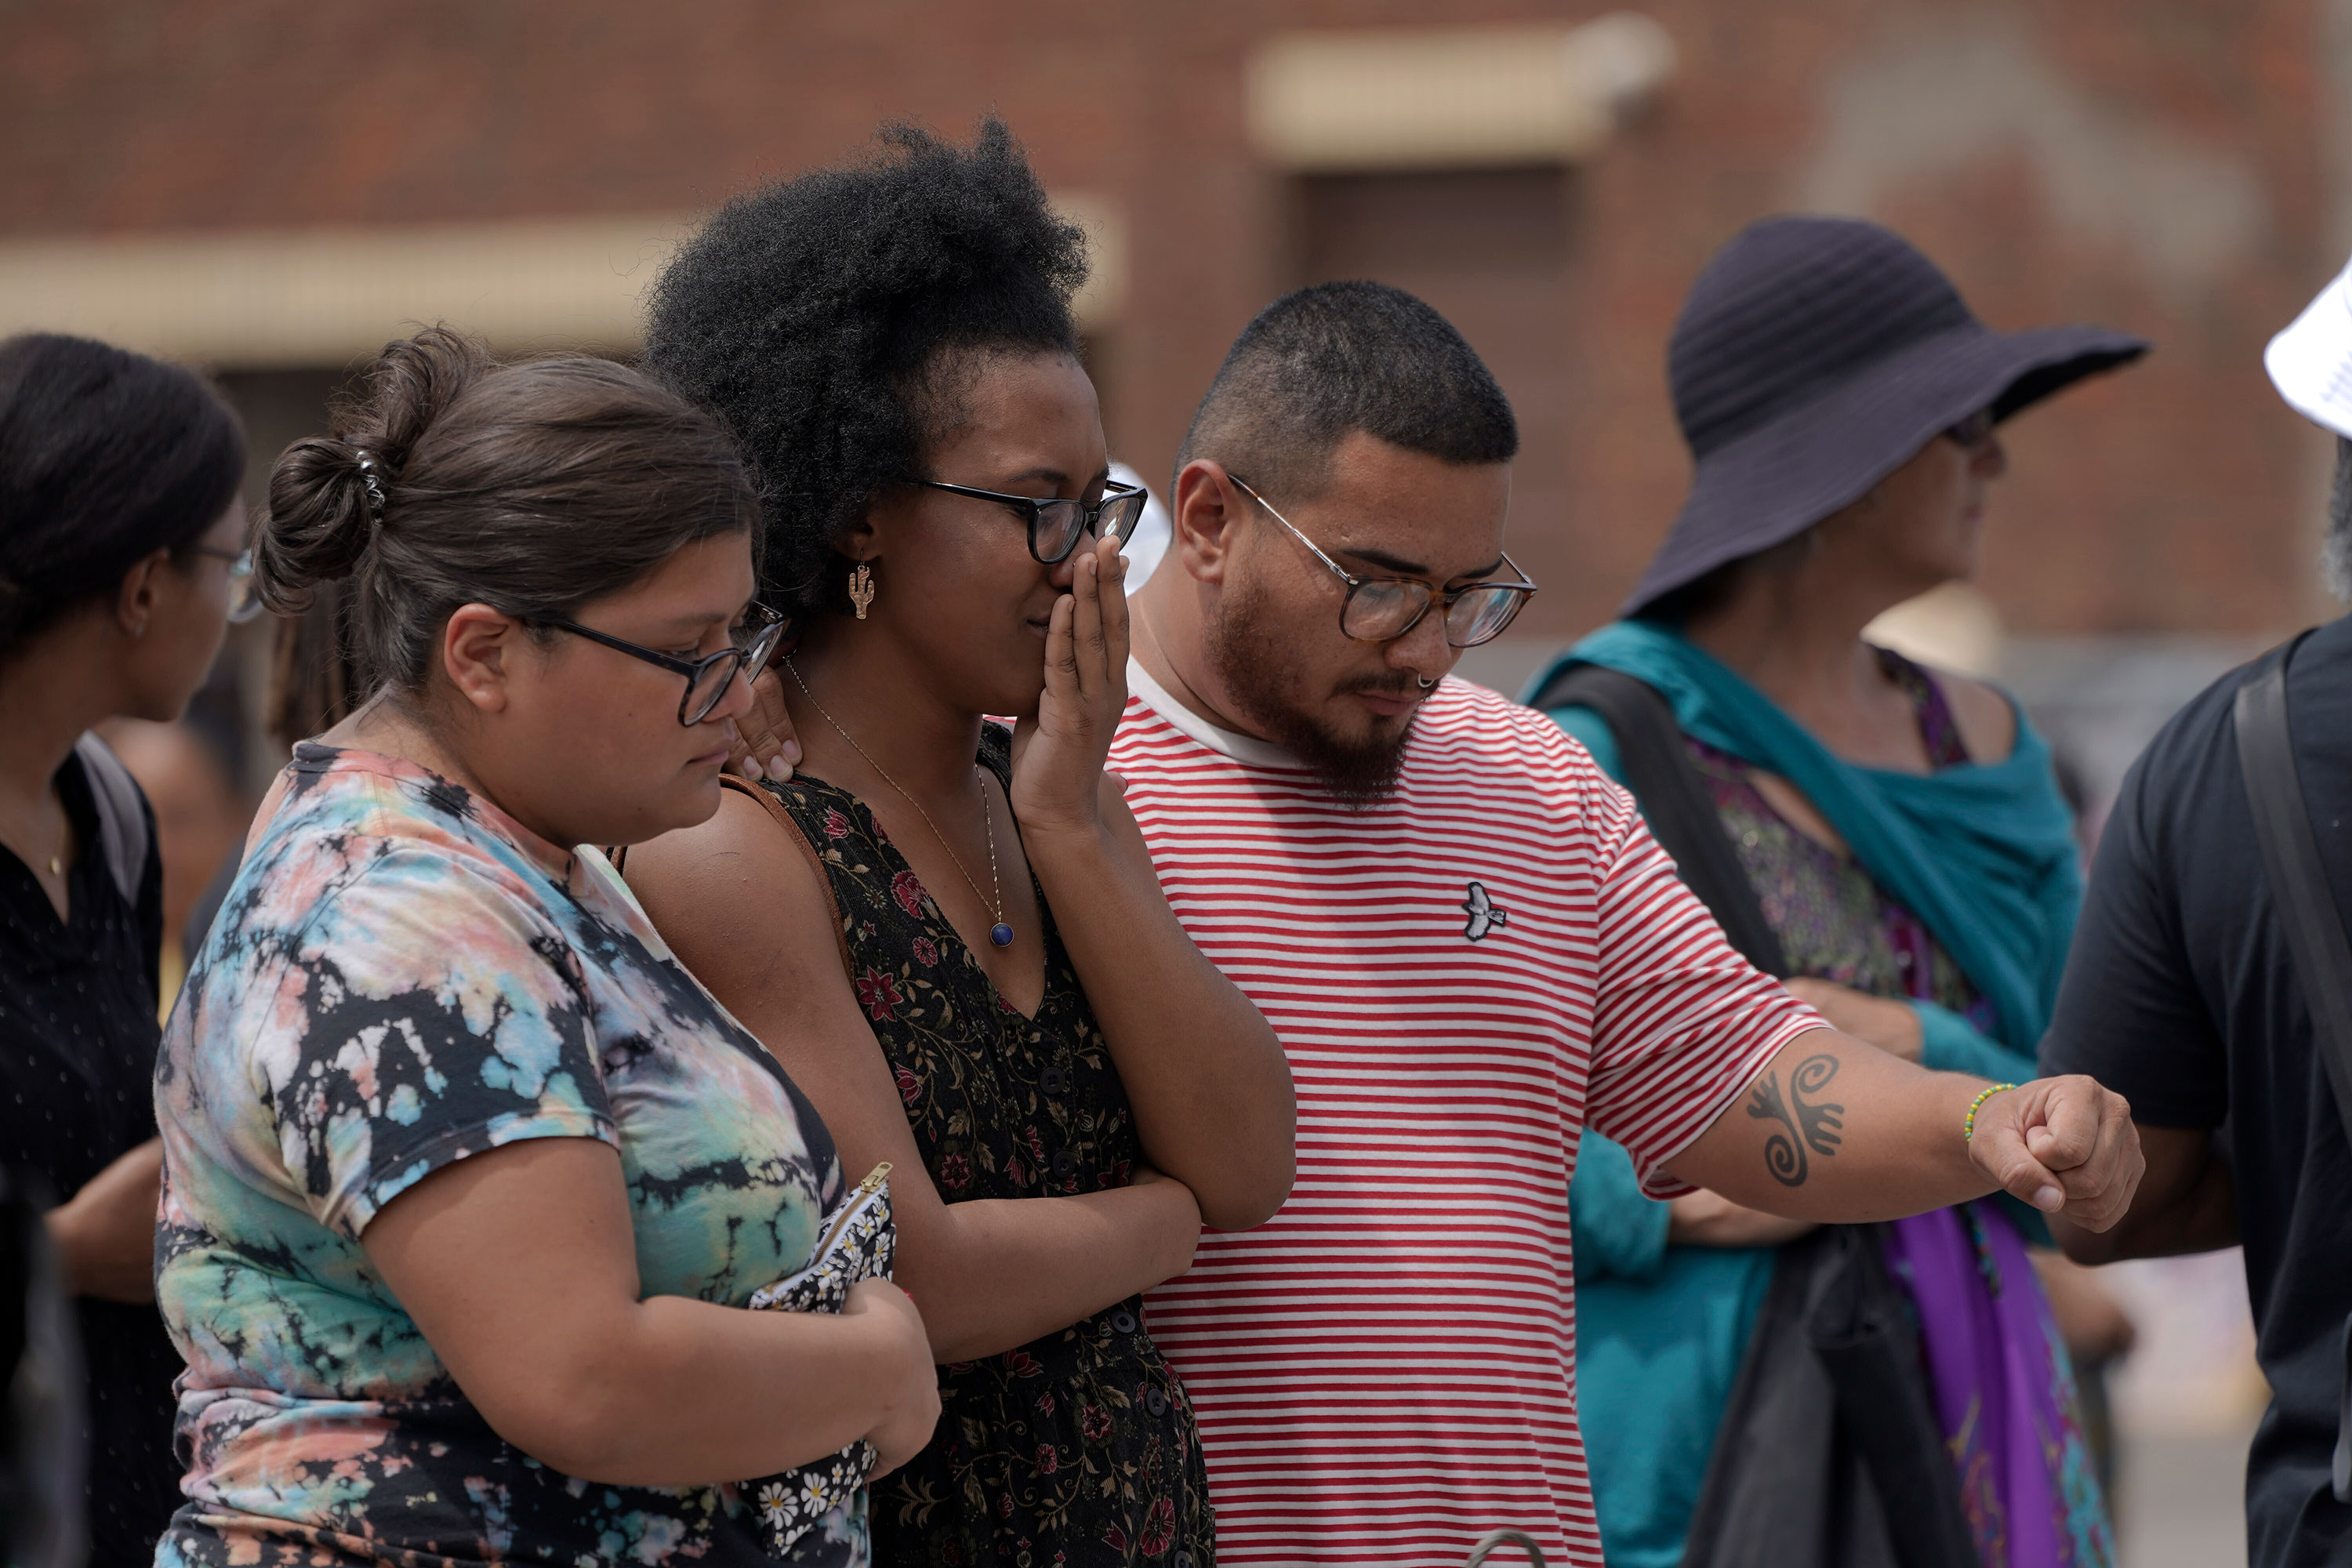 People gather at George Floyd Square during the sentencing hearing on June 25.